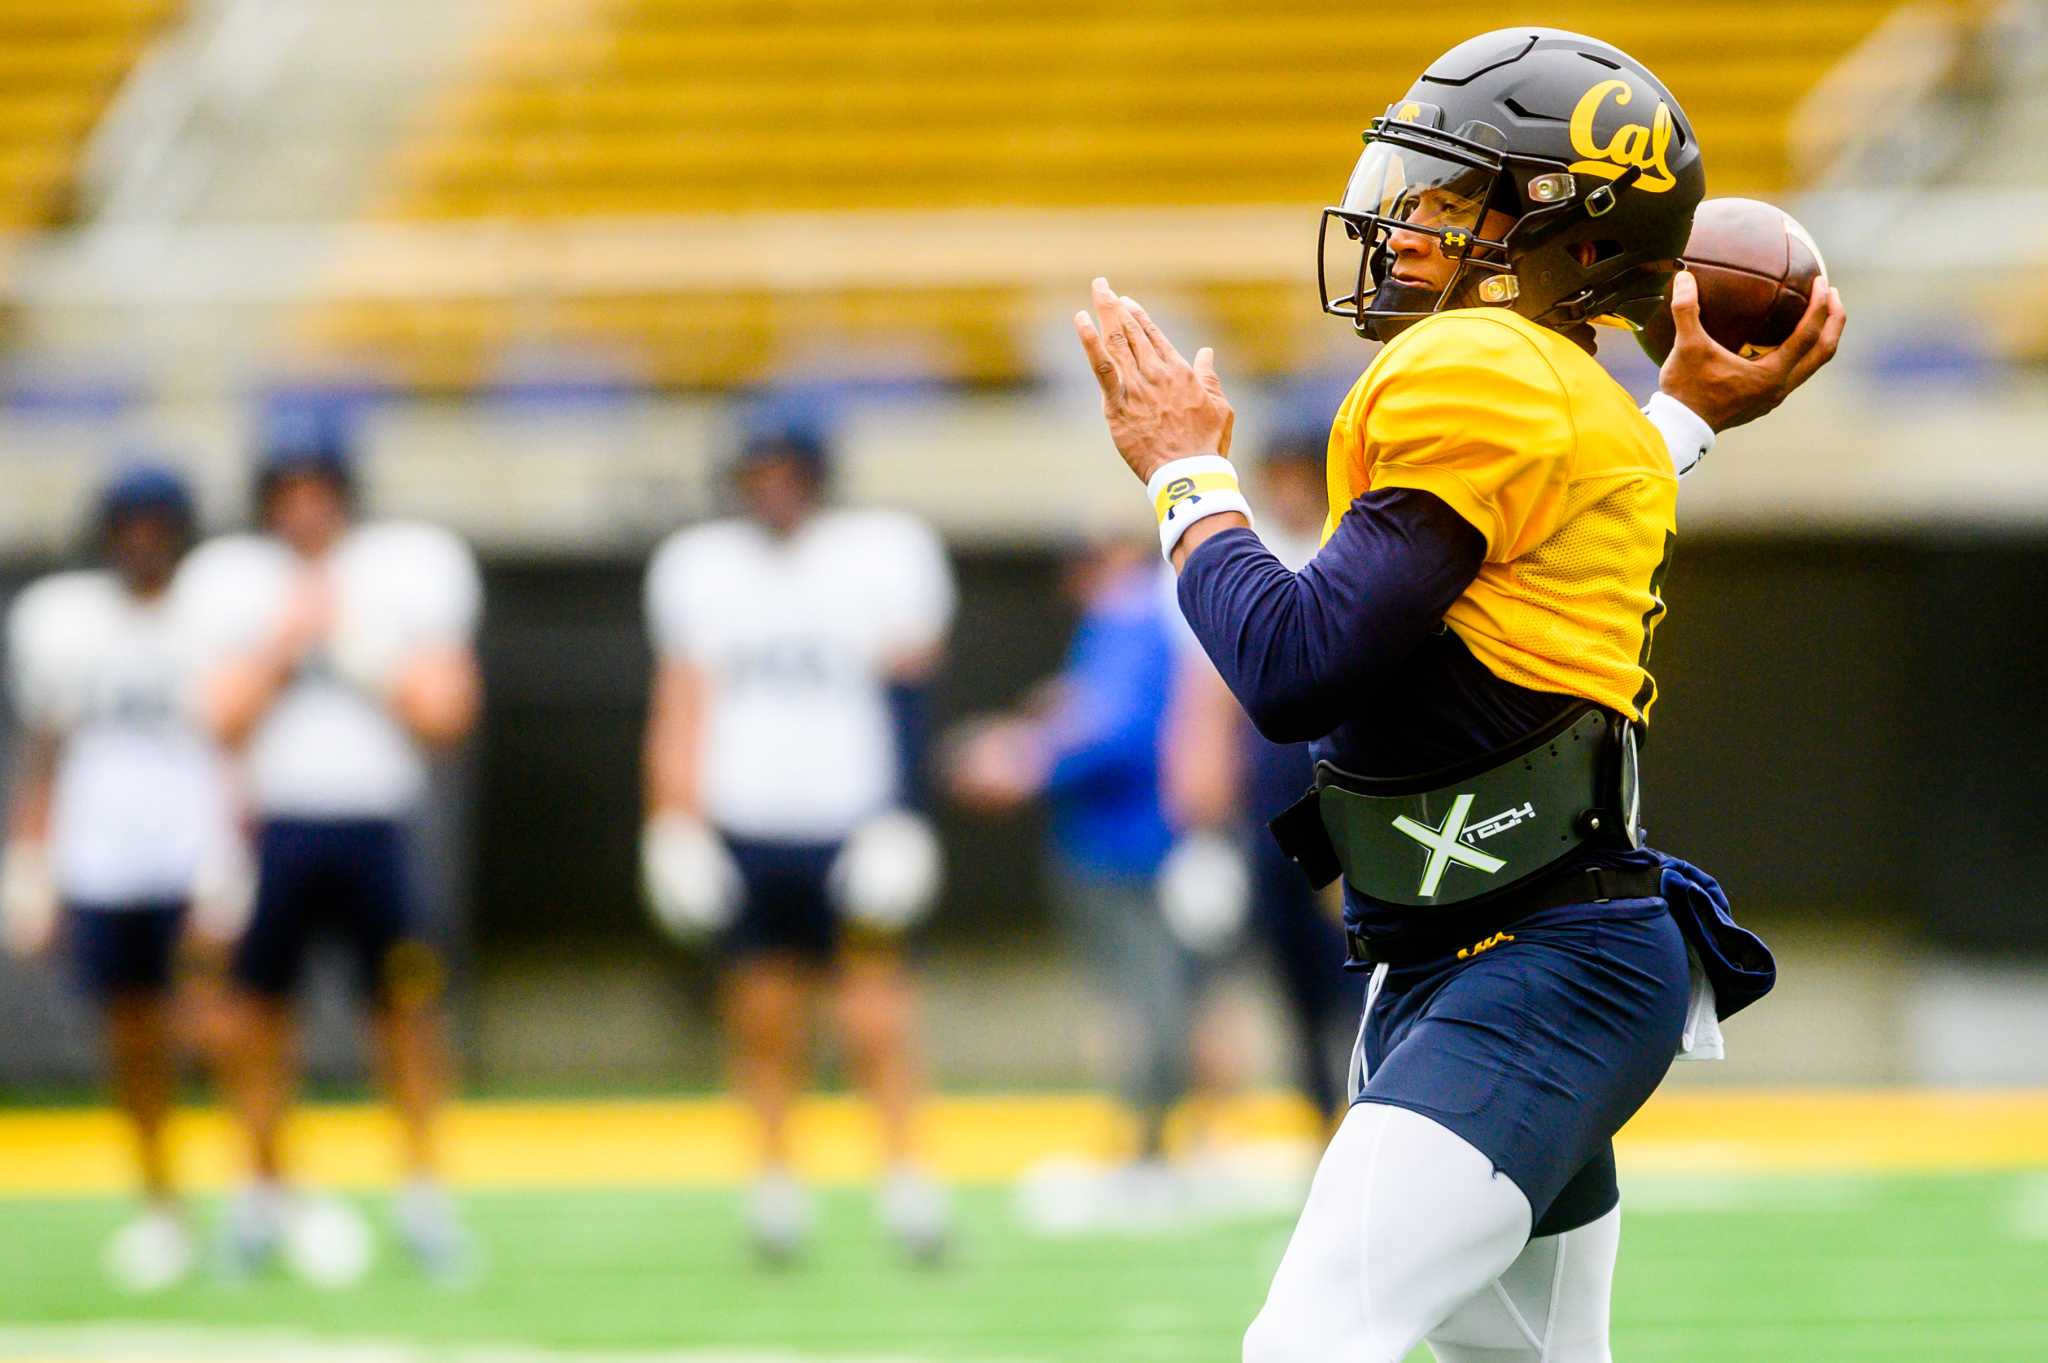 Cal excited about fleet QB Sam Jackson V: 'That dude's a ballplayer'